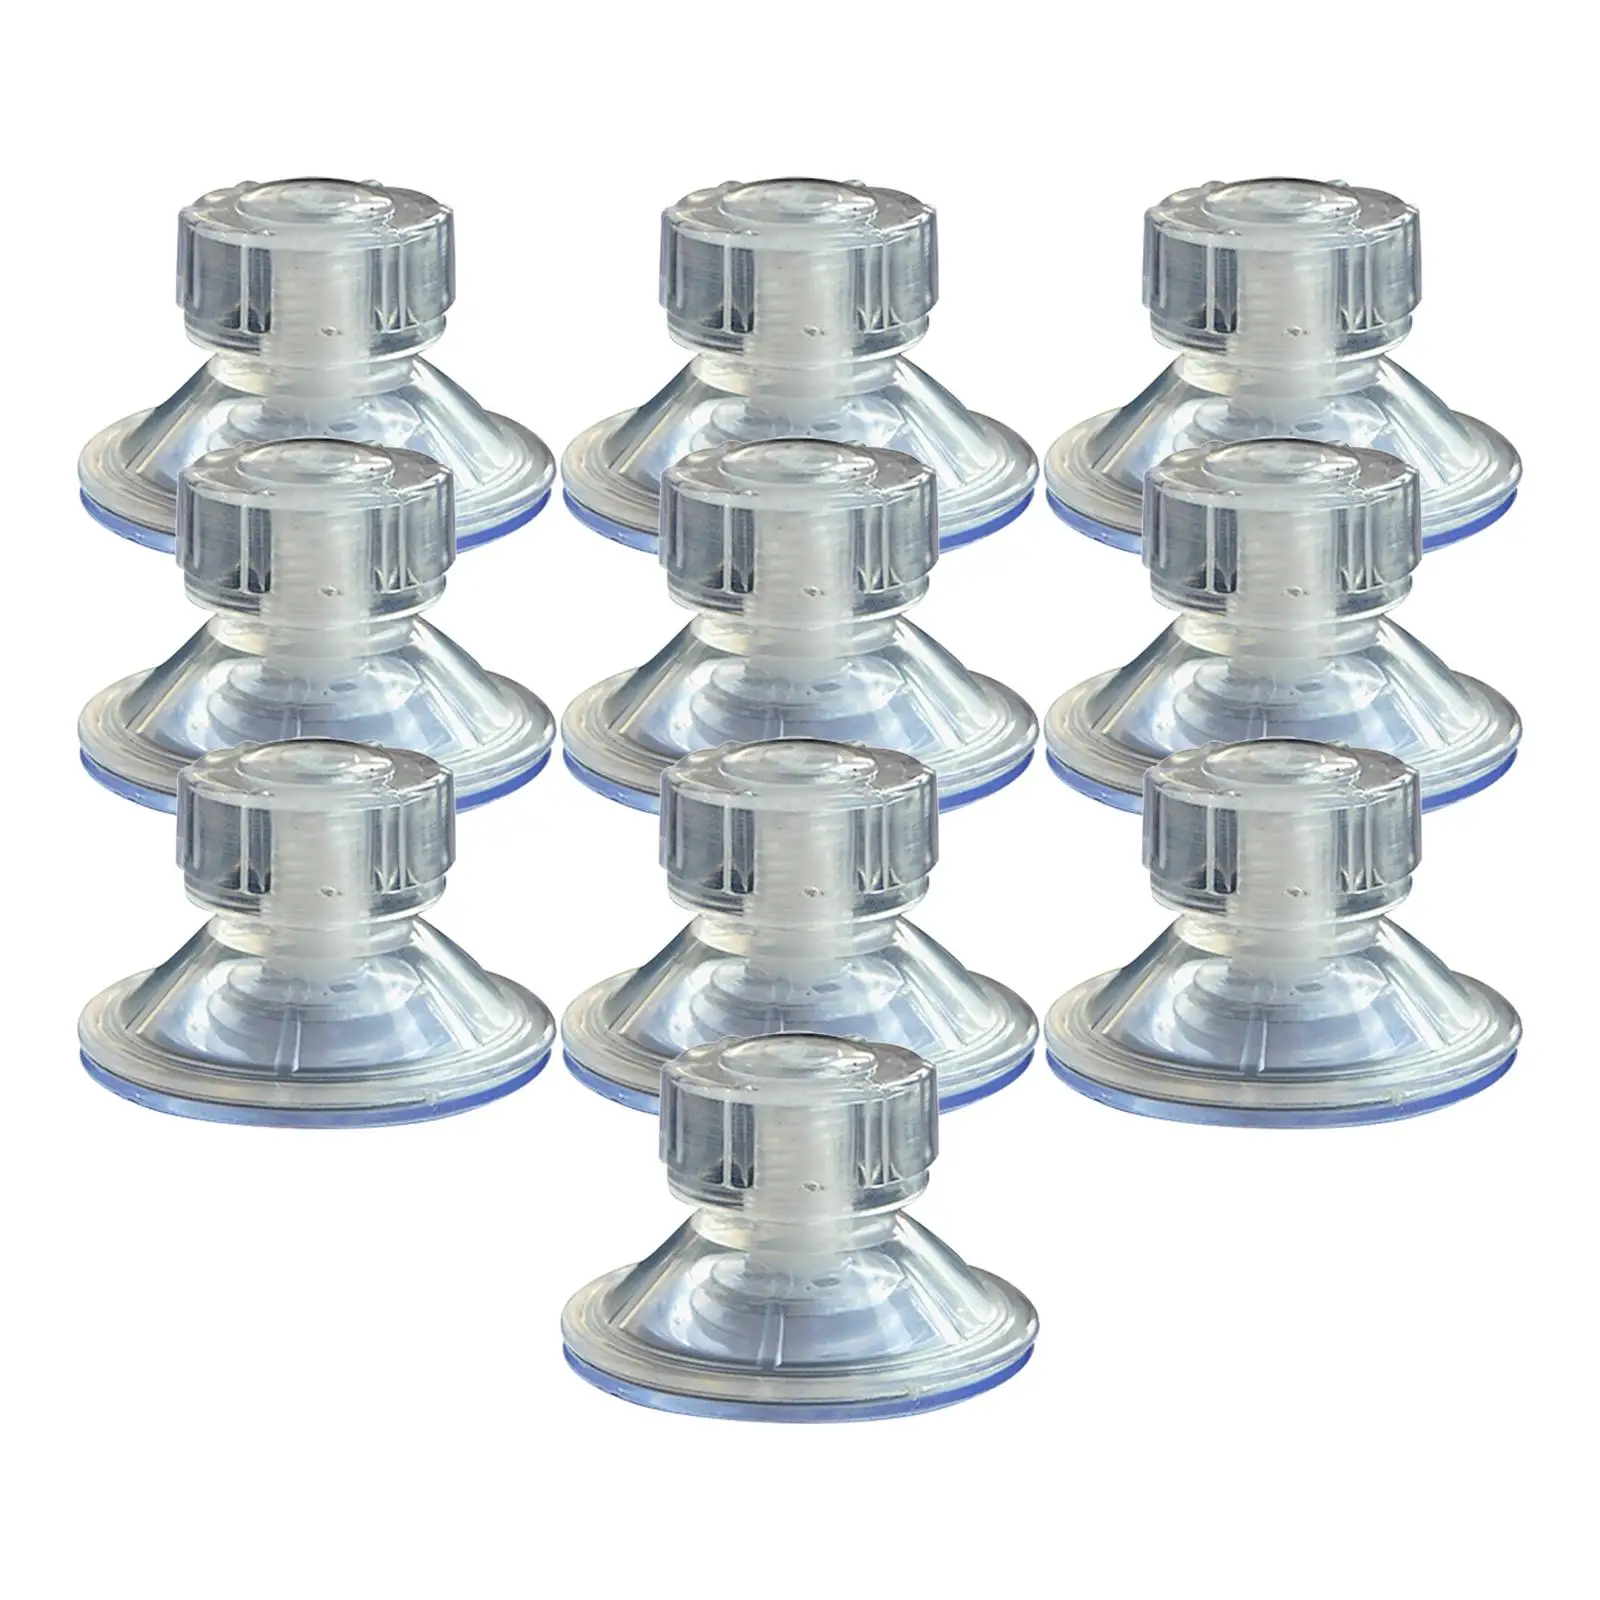 10 Pieces Car Awning Suction Cup Anchor Heavy Duty for  Motorhome